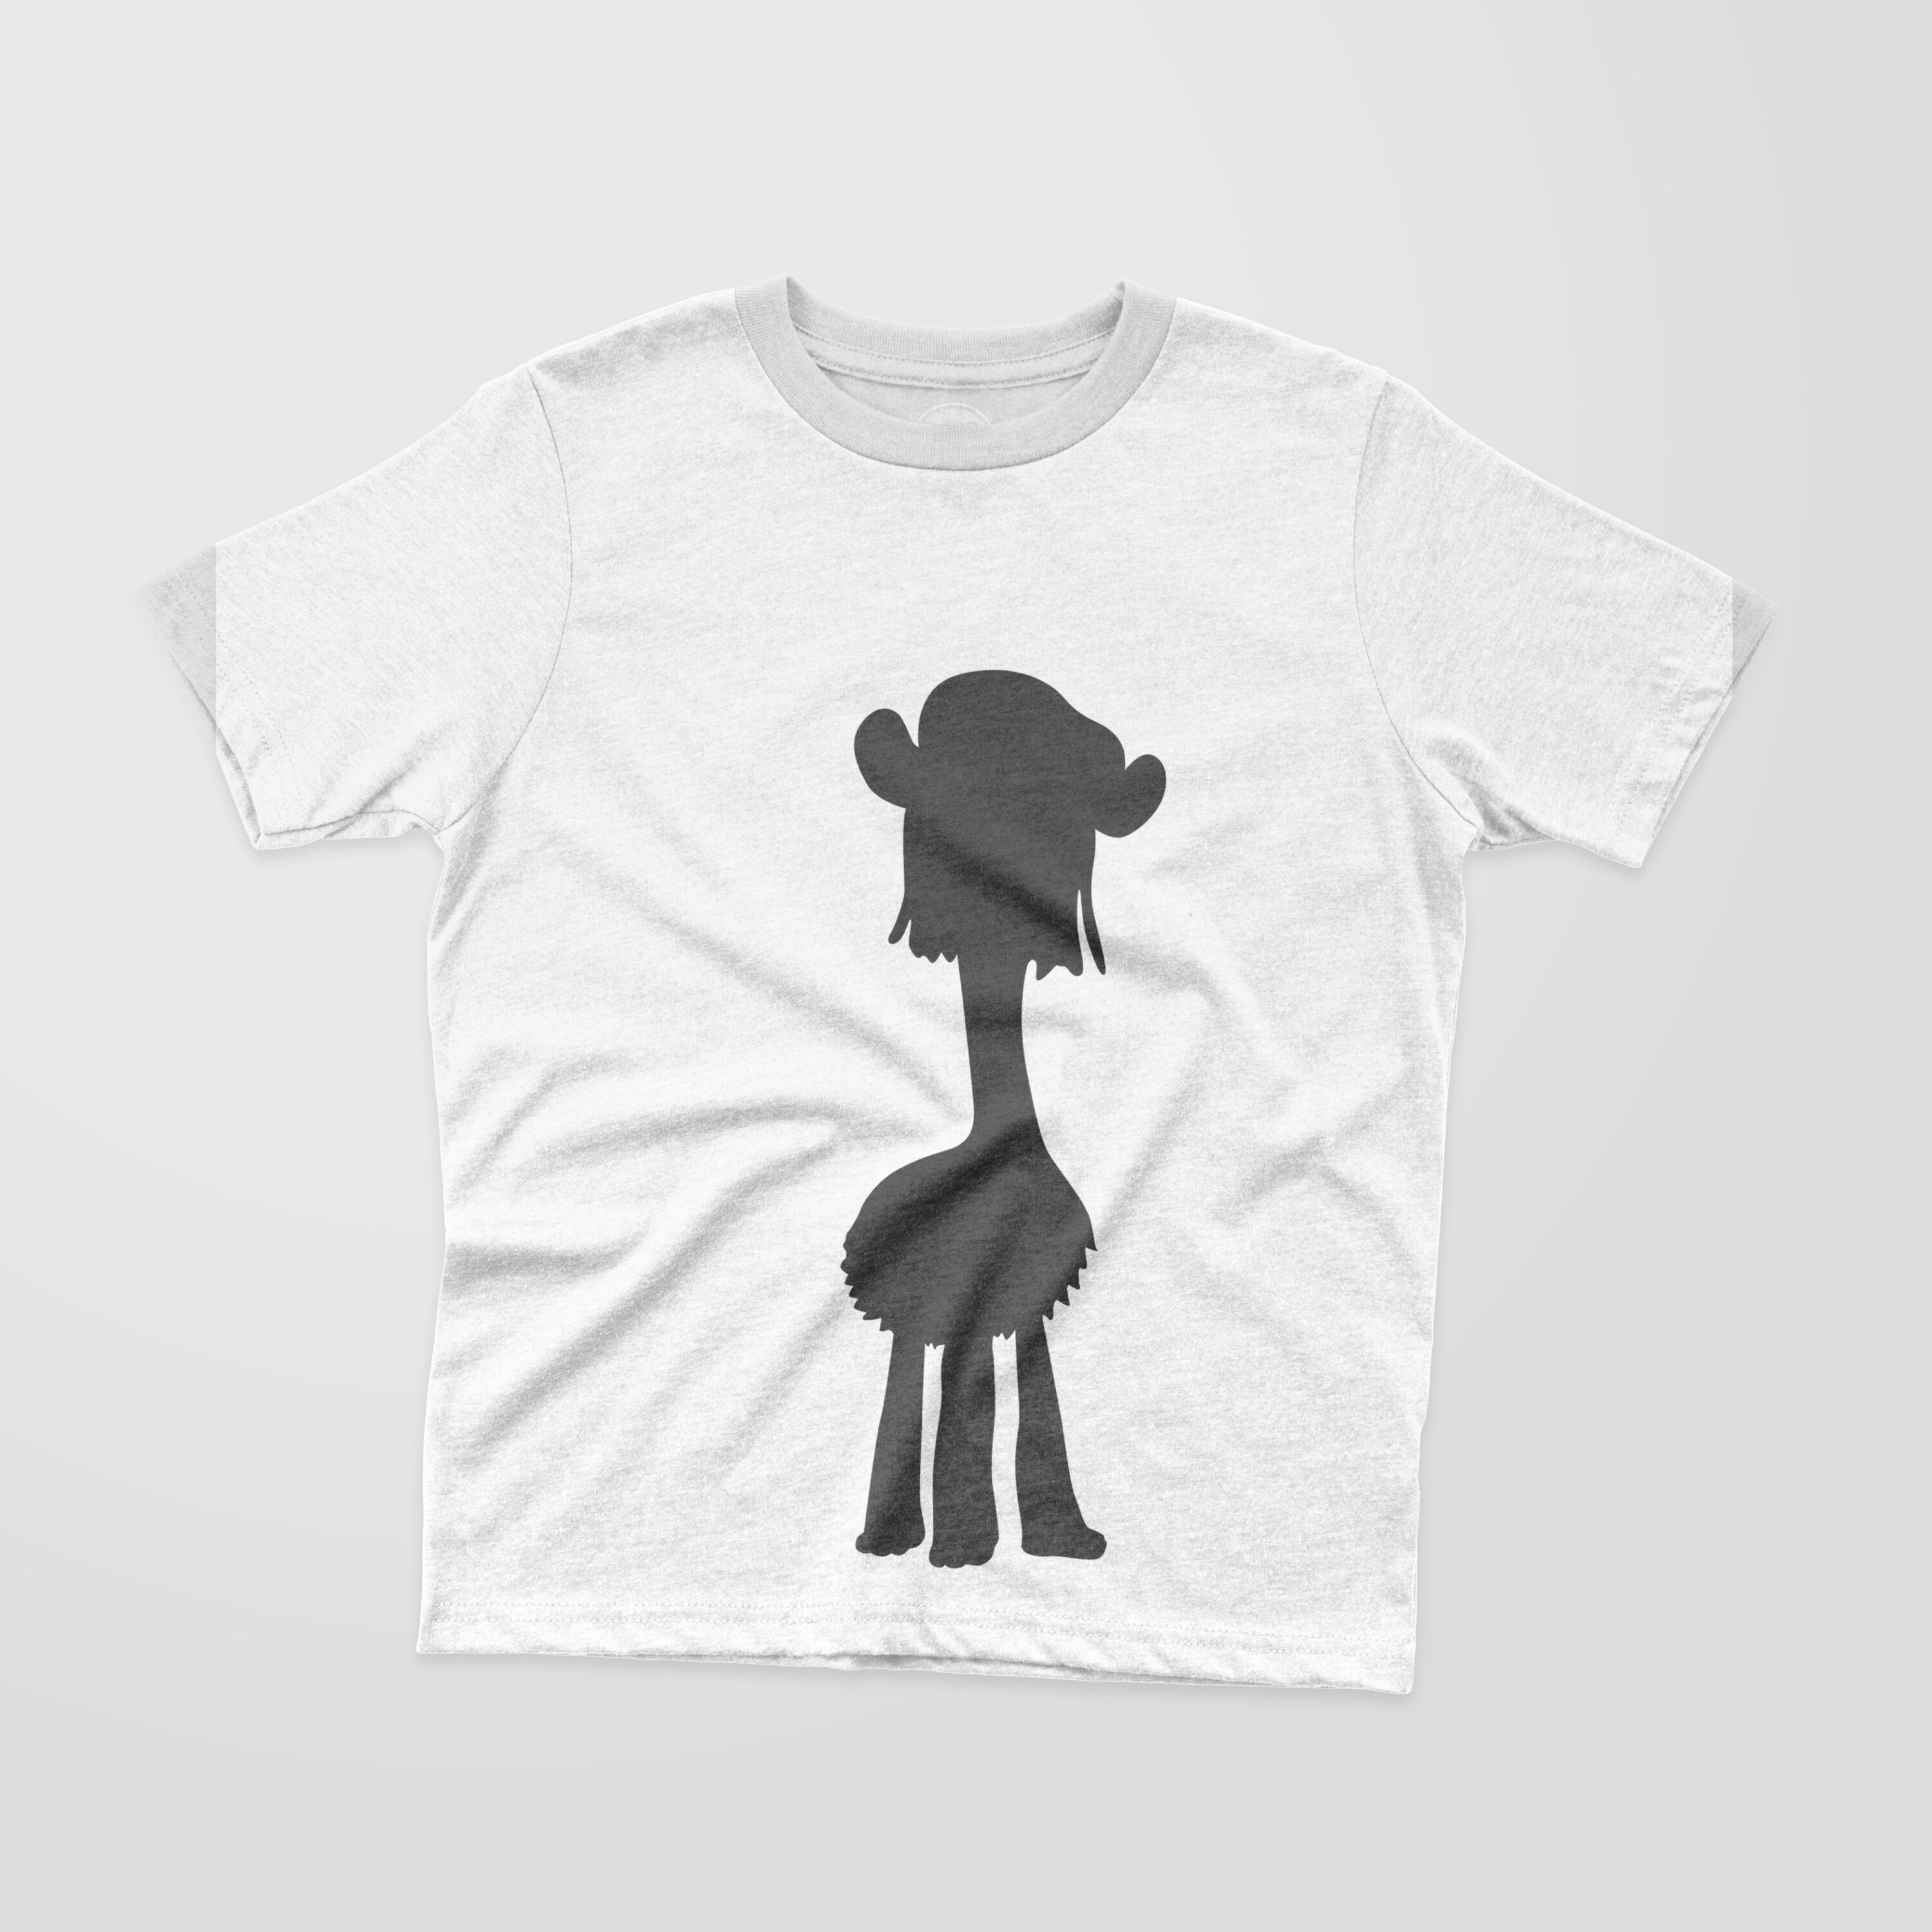 White T-shirt with a black silhouette of a cartoon character - Cooper.